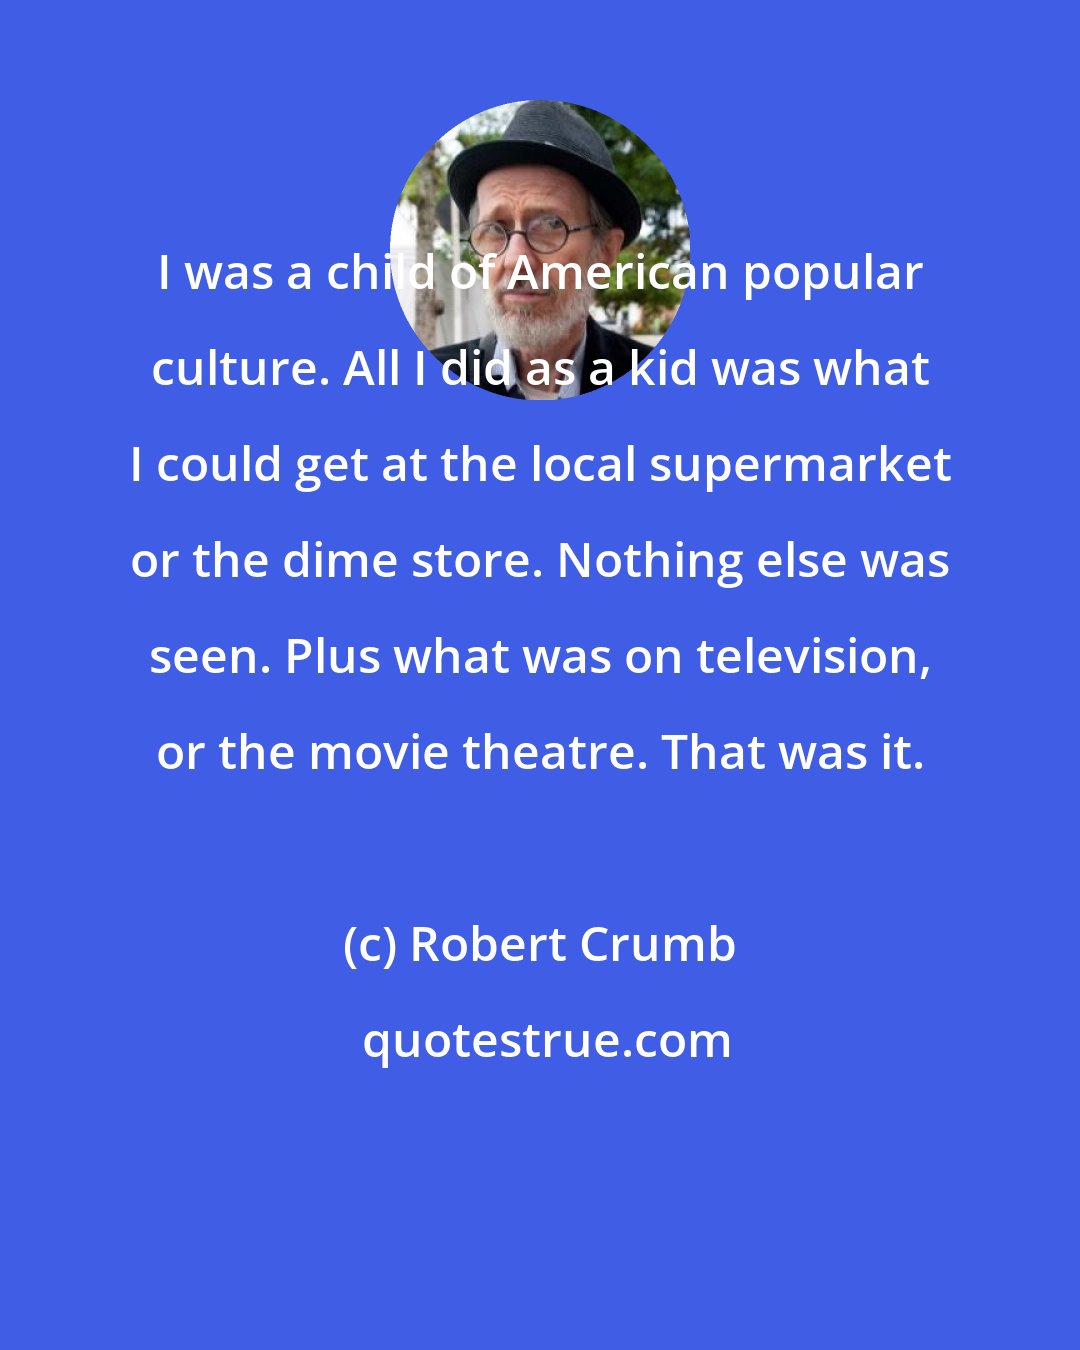 Robert Crumb: I was a child of American popular culture. All I did as a kid was what I could get at the local supermarket or the dime store. Nothing else was seen. Plus what was on television, or the movie theatre. That was it.